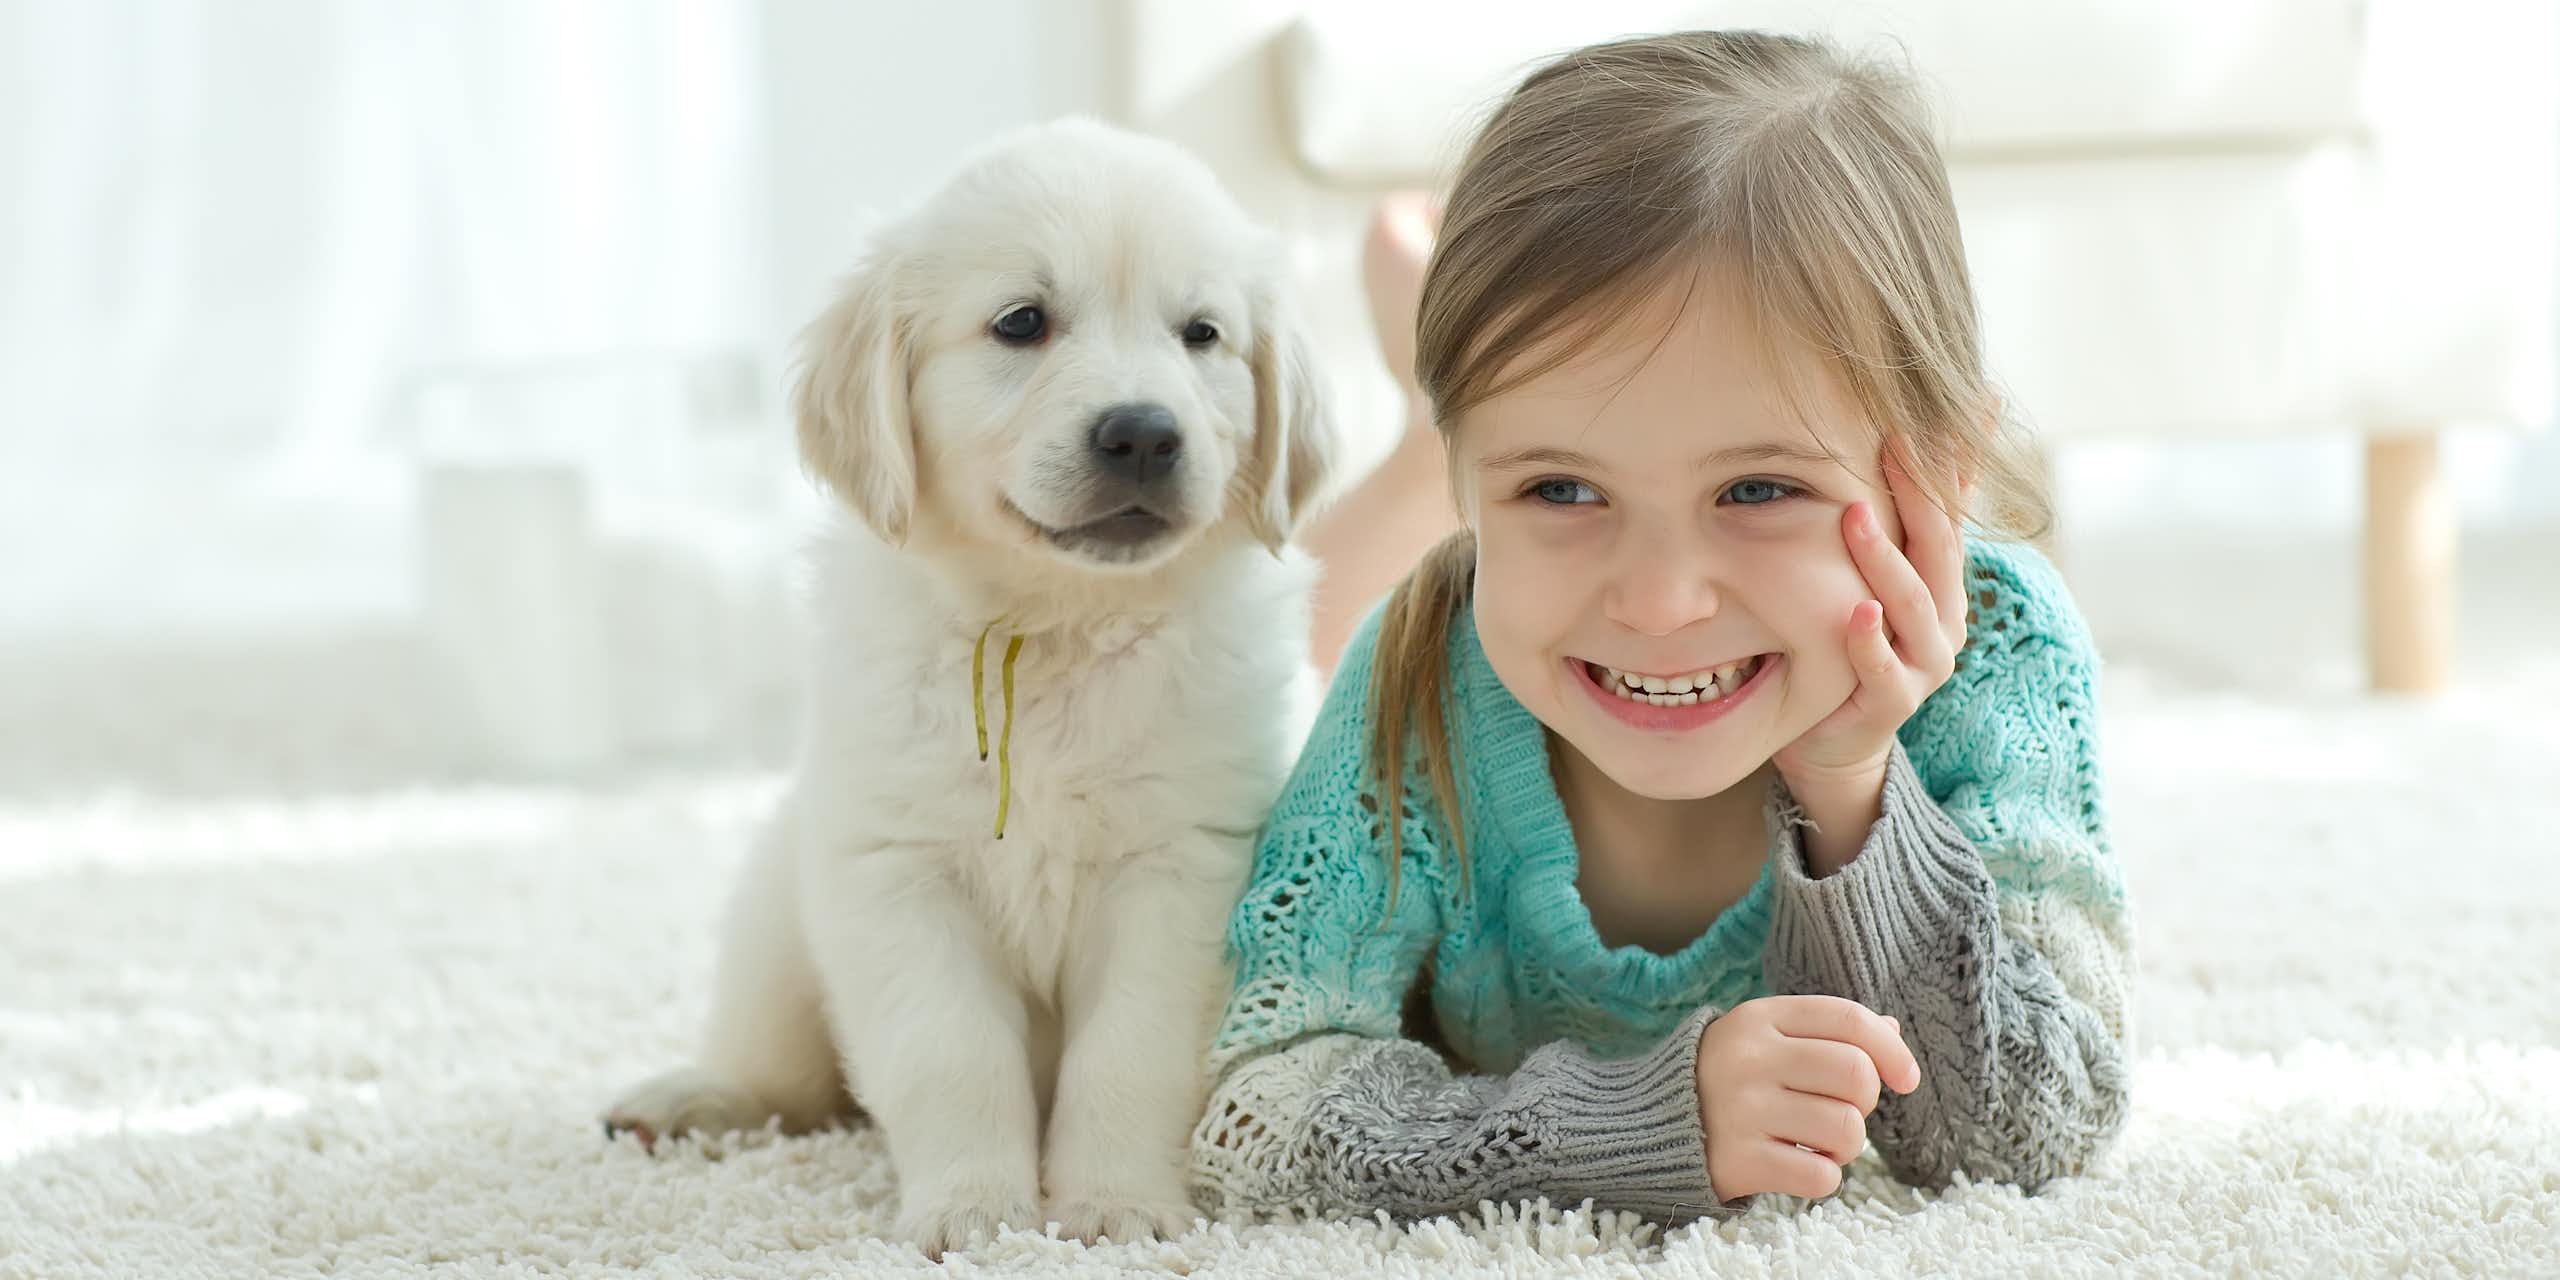 A puppy and a little girl. 